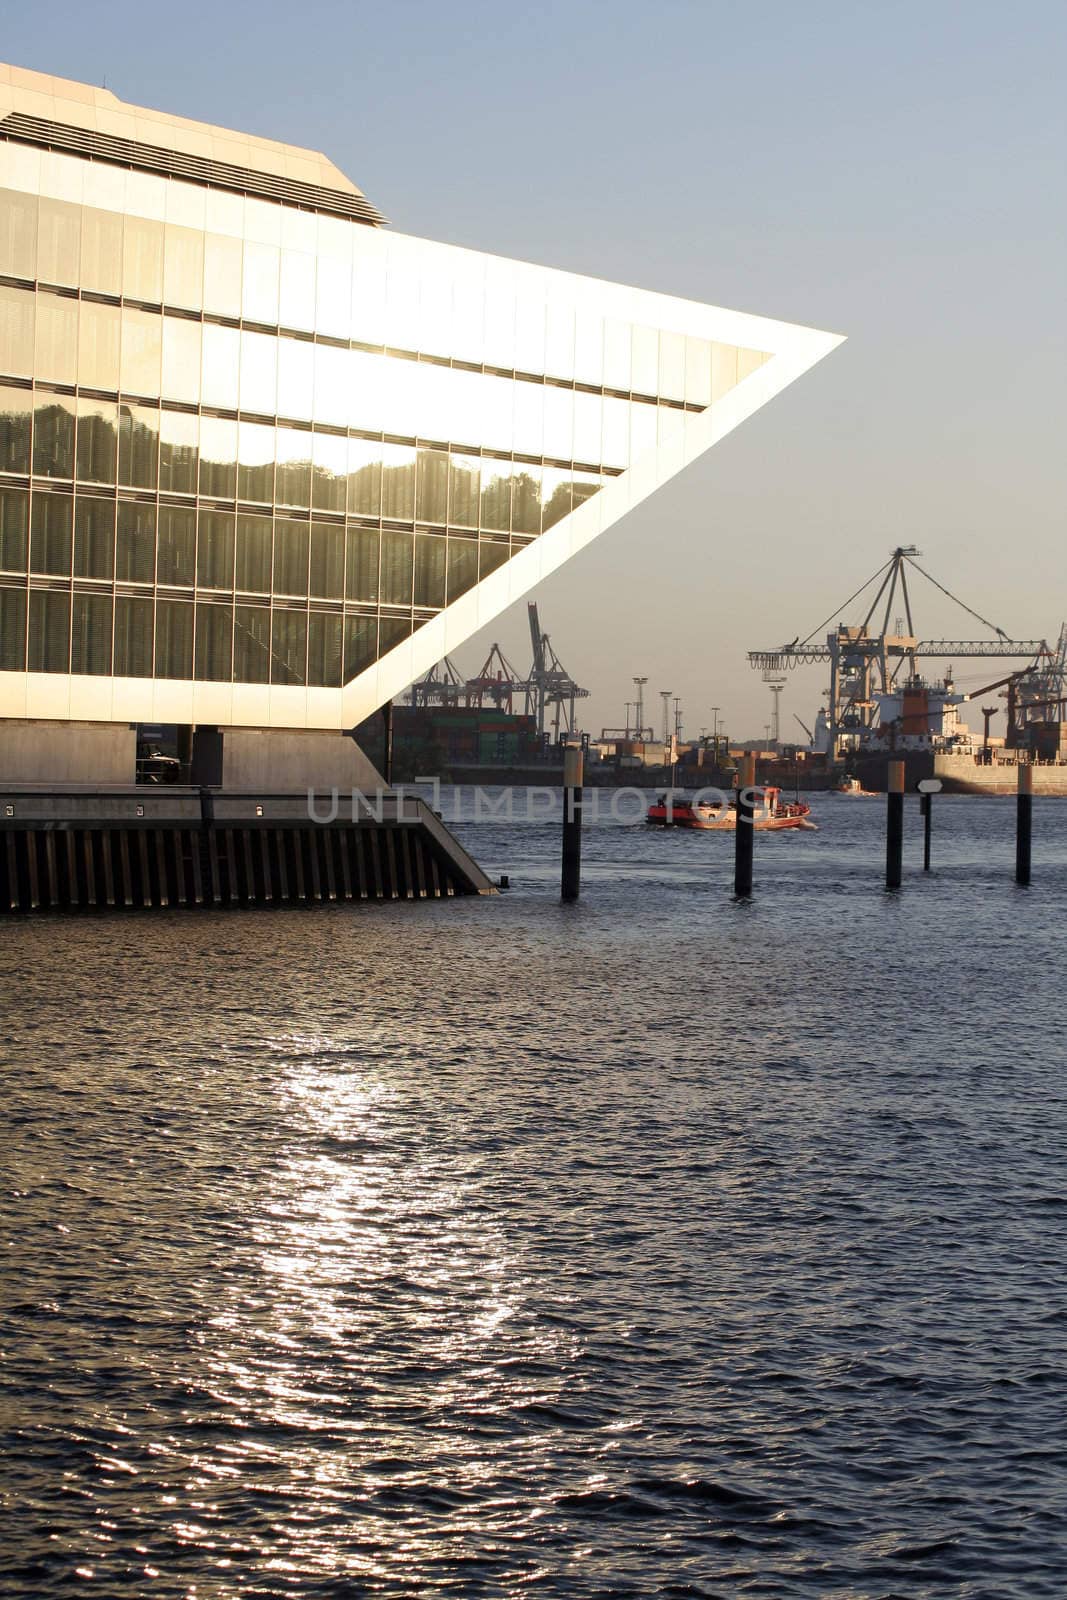 Modern office building 'Dockland' (finished 2005) in Hamburg harbour at sunset. The opposite coastline is reflected in the windows, which again reflect the sunlight onto the water surface. Ships and cranes in the background.